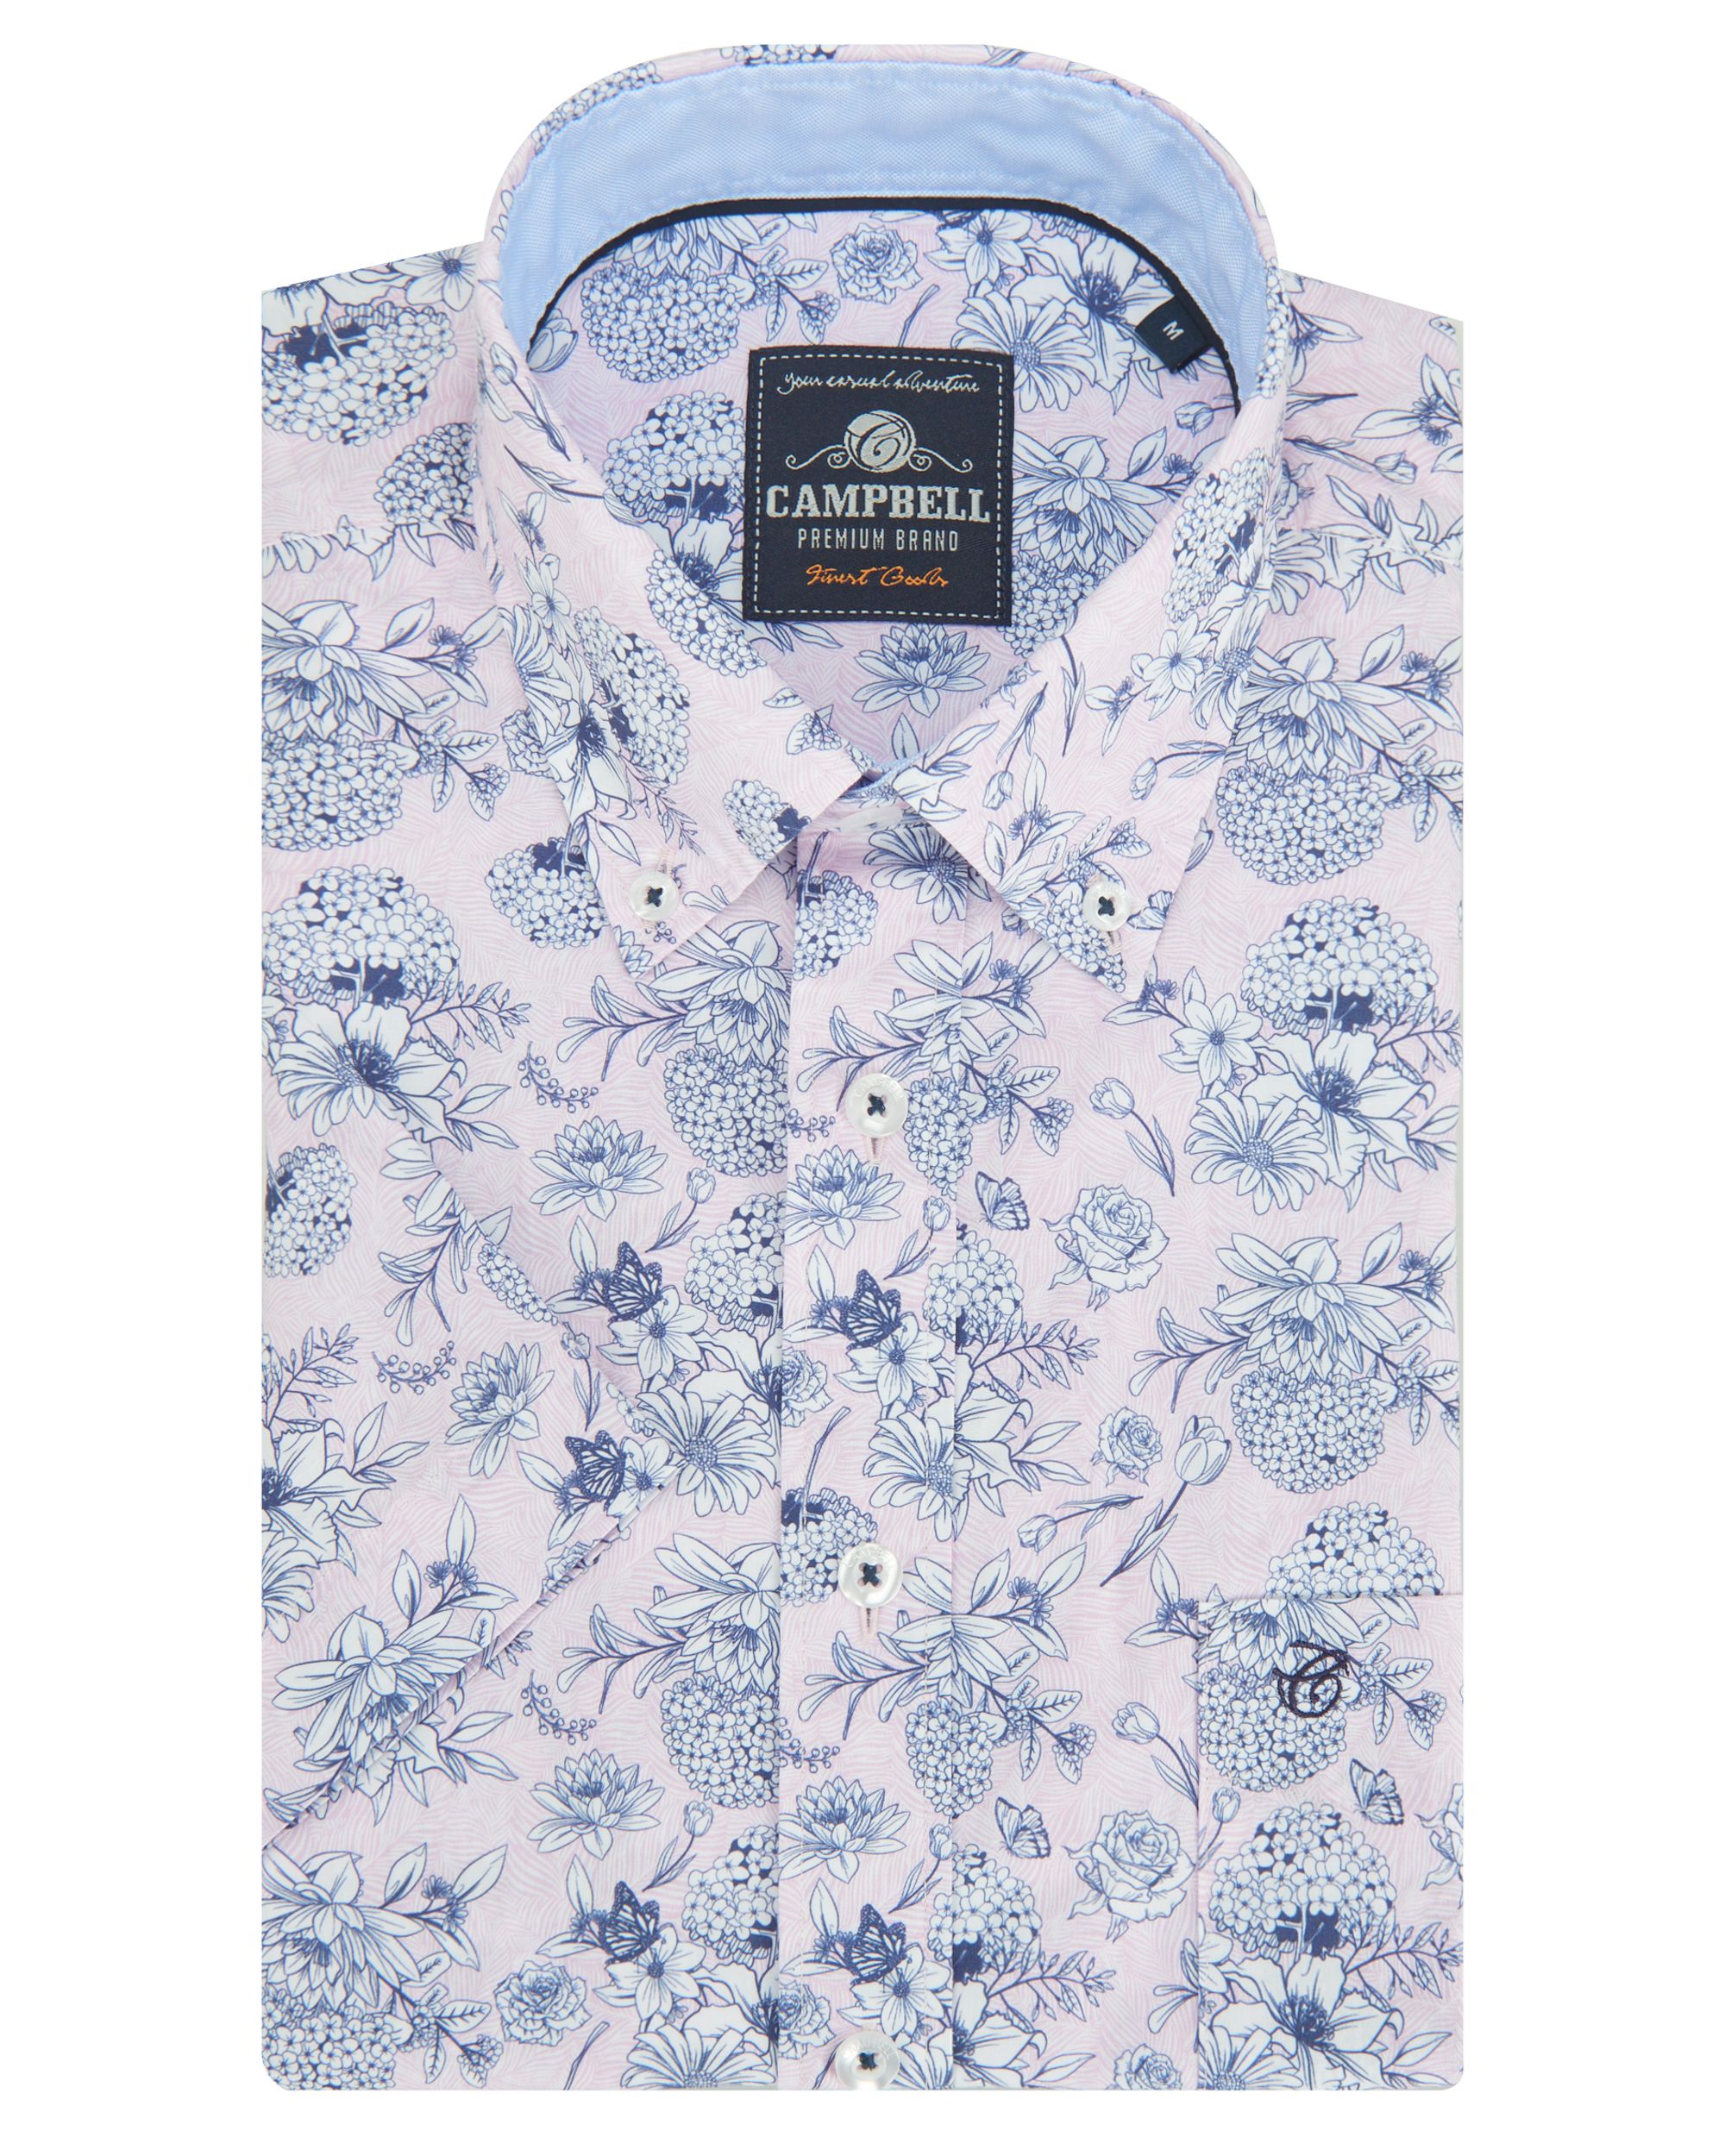 Campbell Classic Ranger Casual Overhemd KM Lavender Frost dessin 089022-002-L